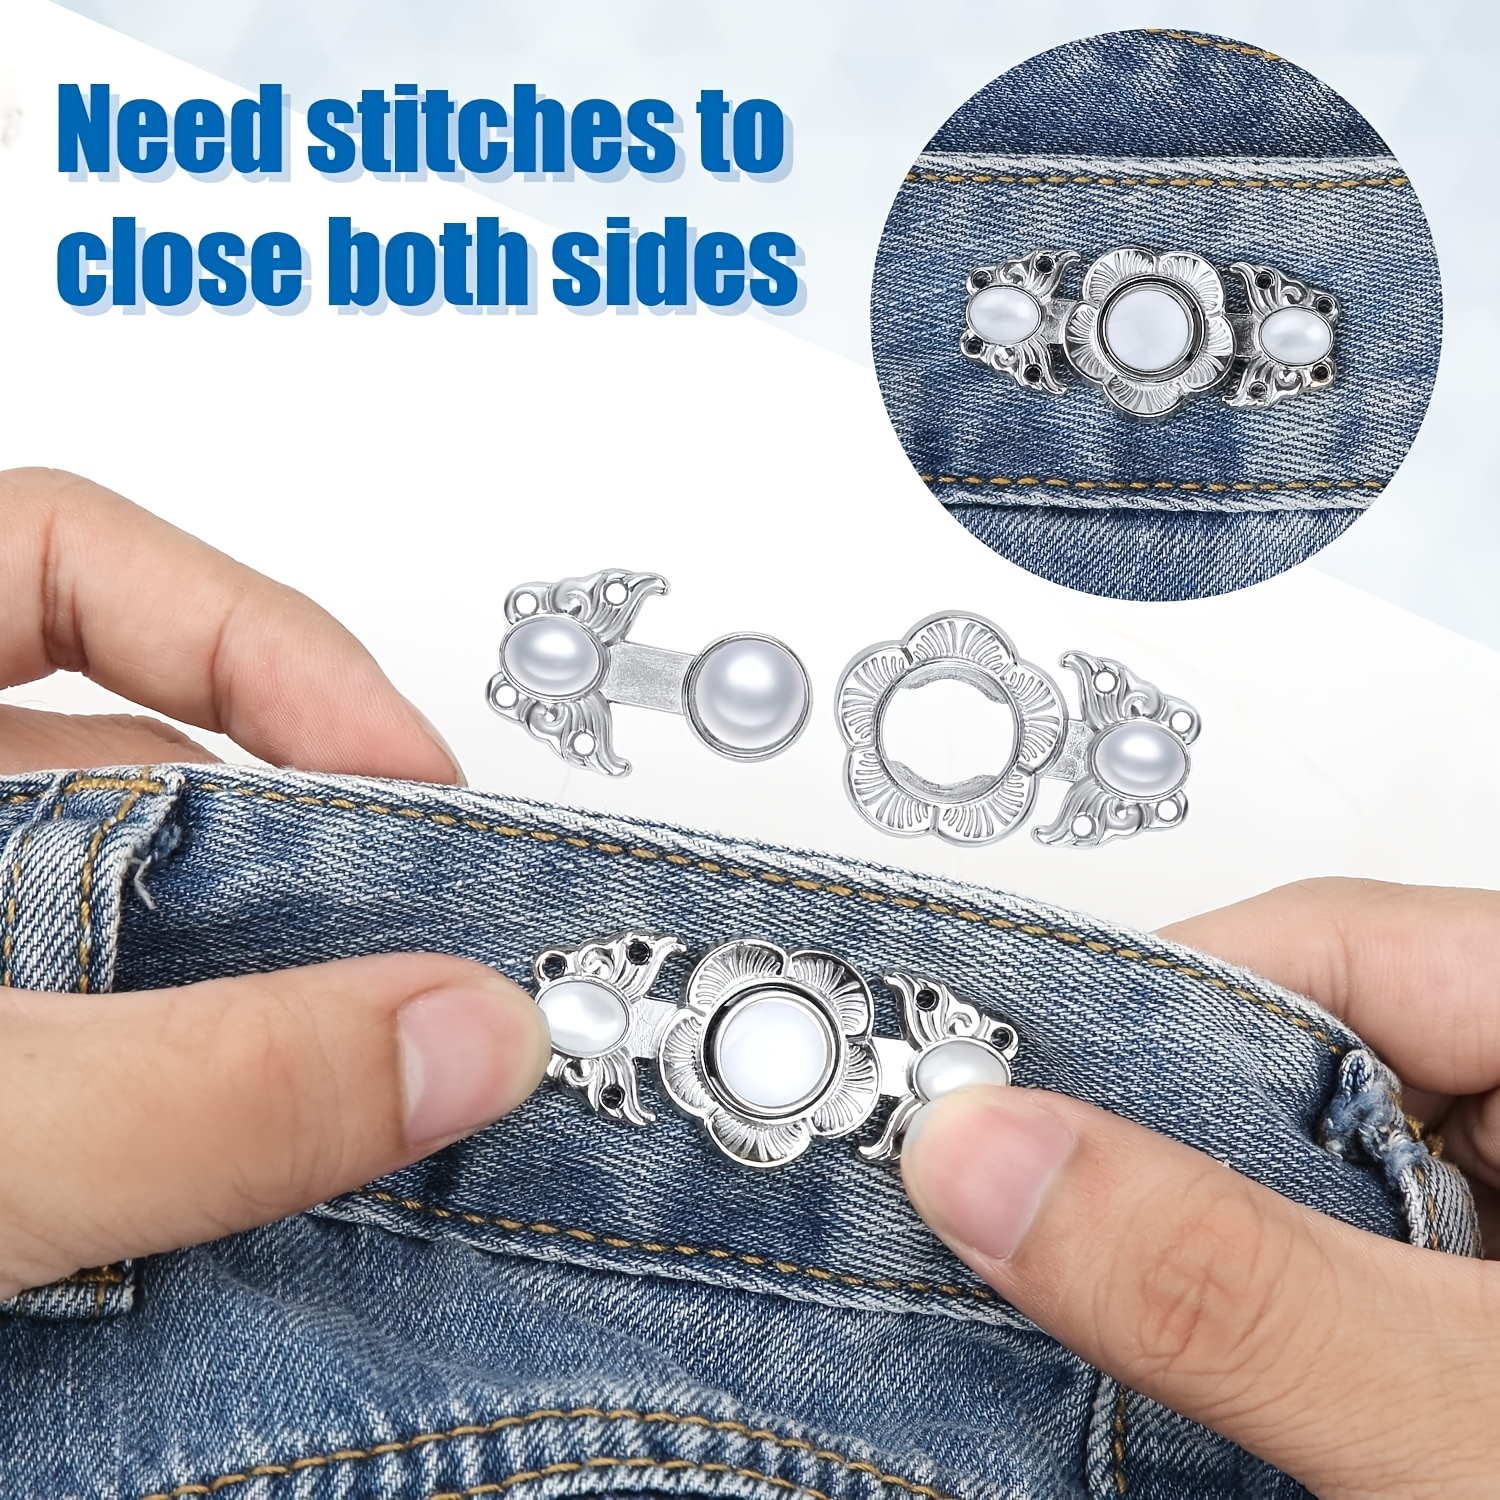  6 Pairs Bear Buttons for Jean Clips to Tighten Waist Pant Size  Adjuster Buttons for Jeans to Make Smaller Cute Bear Waist Pant Adjustable  Button Fit Tighten Pant Bear Adjustable Pants